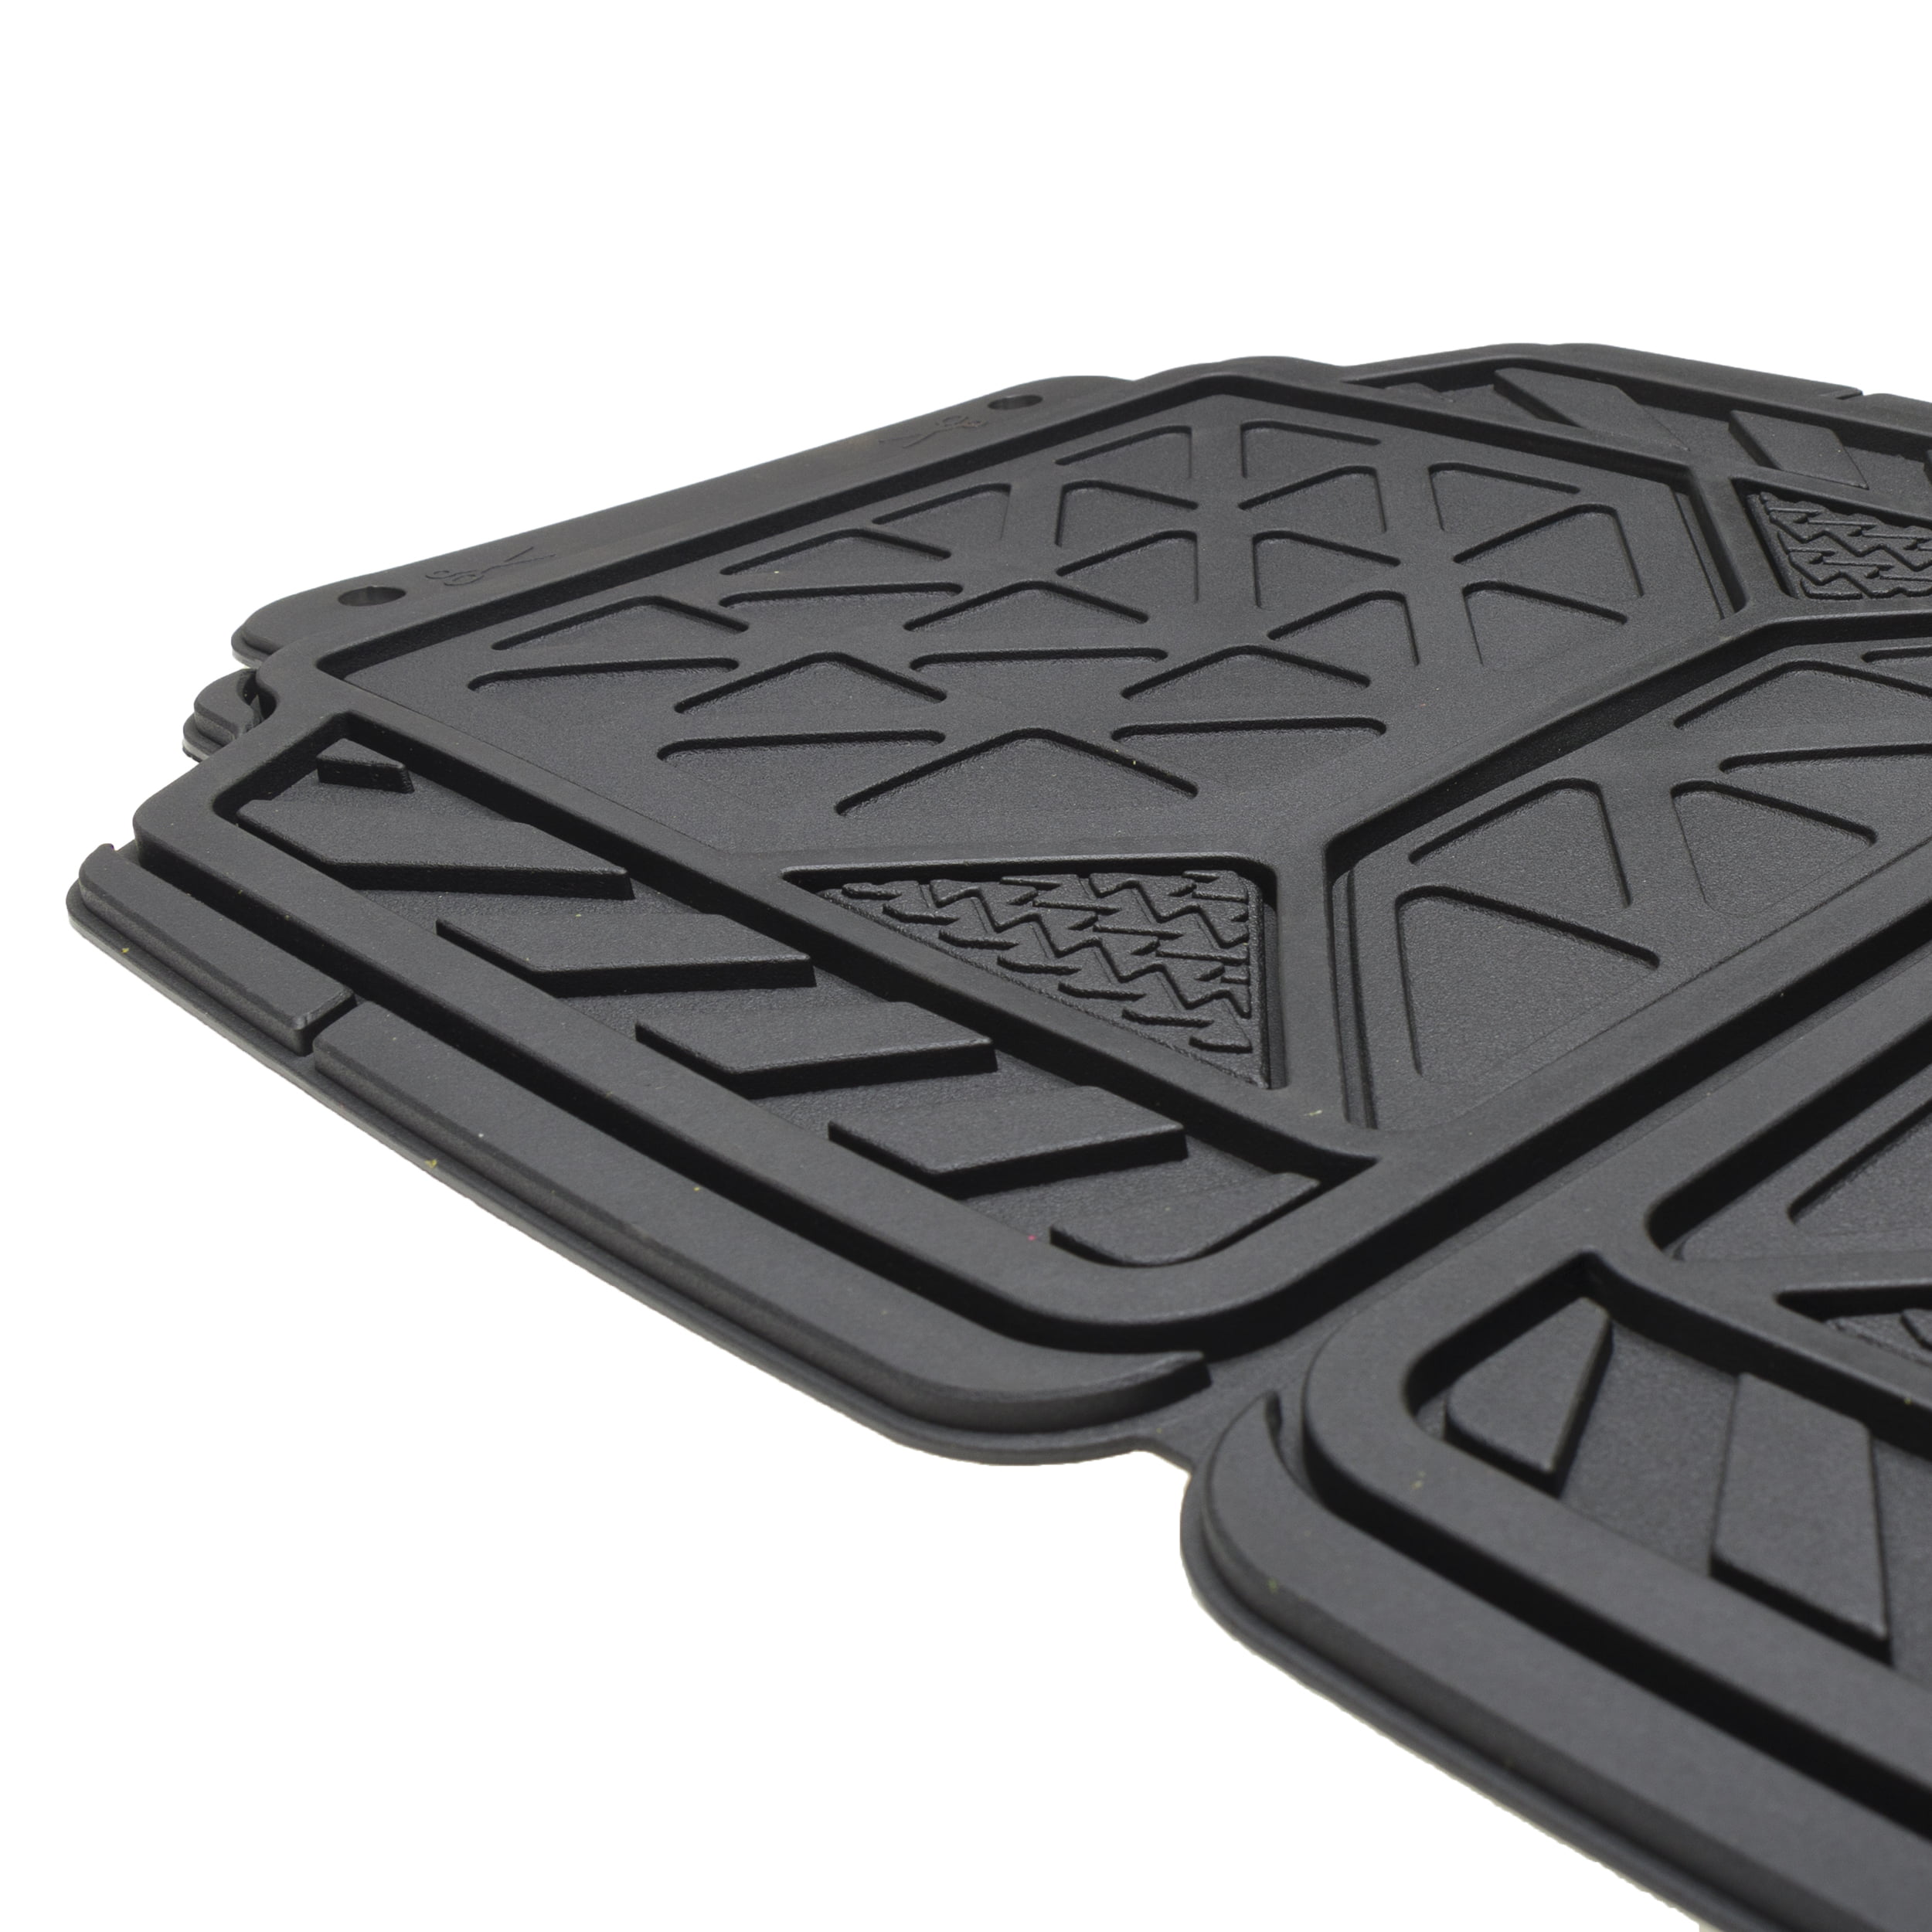 Armor All 4-Piece Trim-to-Fit Black, Rubber Floor Mats 79960DCWDI